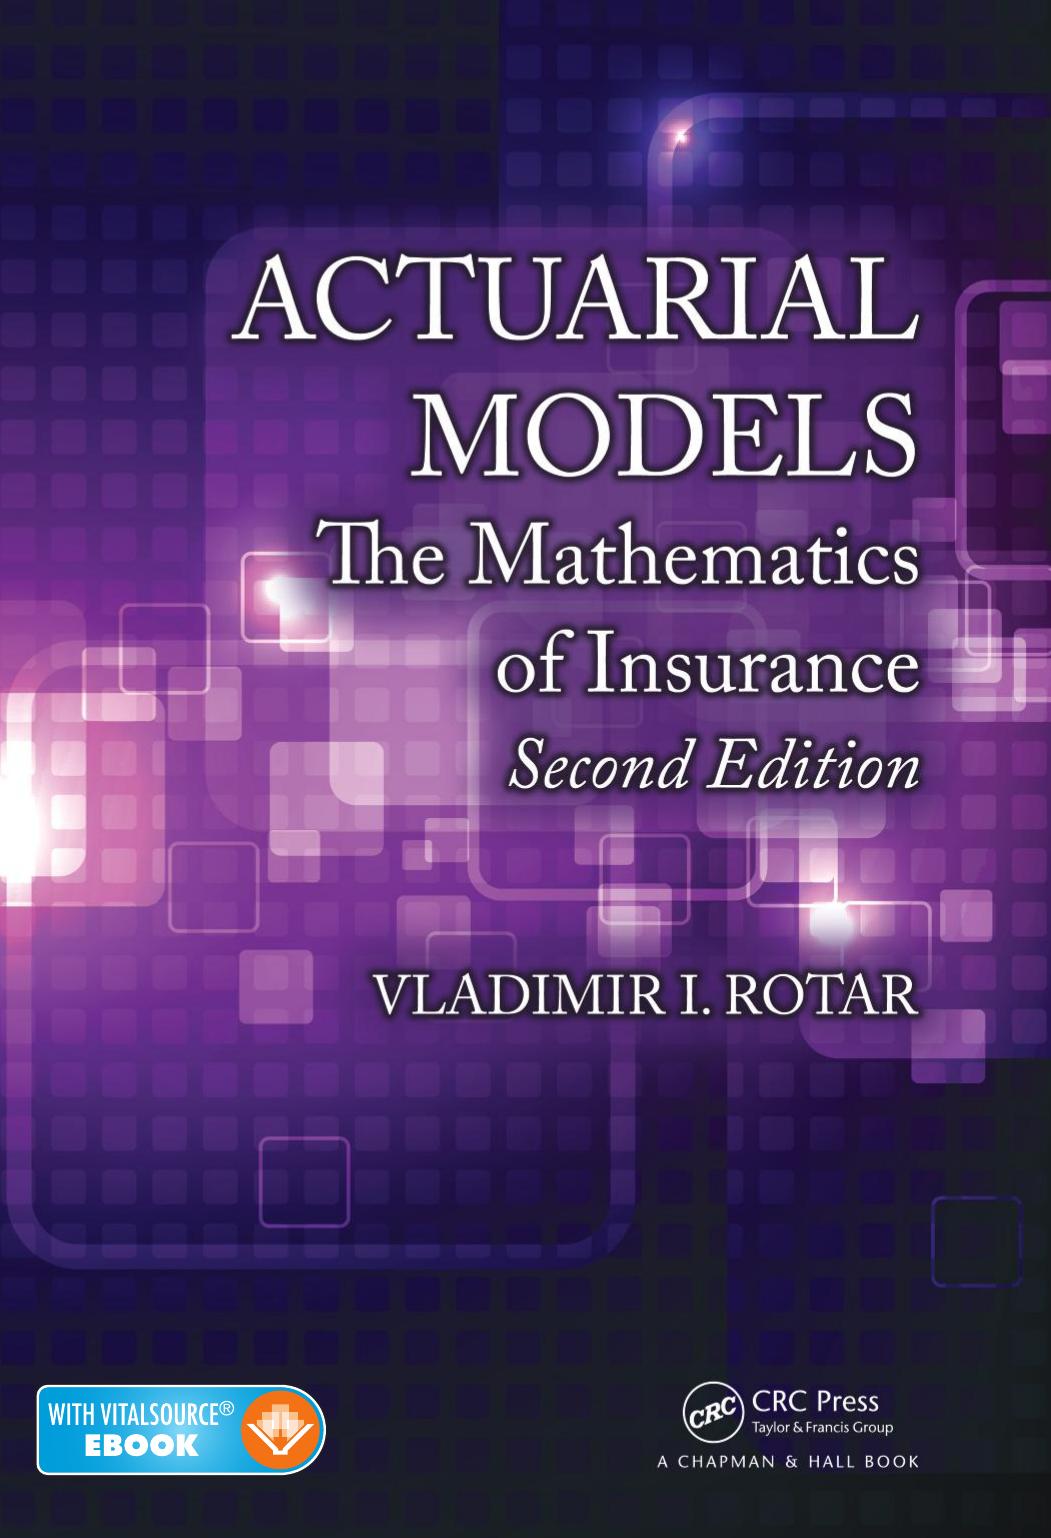 Actuarial Models: The Mathematics of Insurance, Second Edition